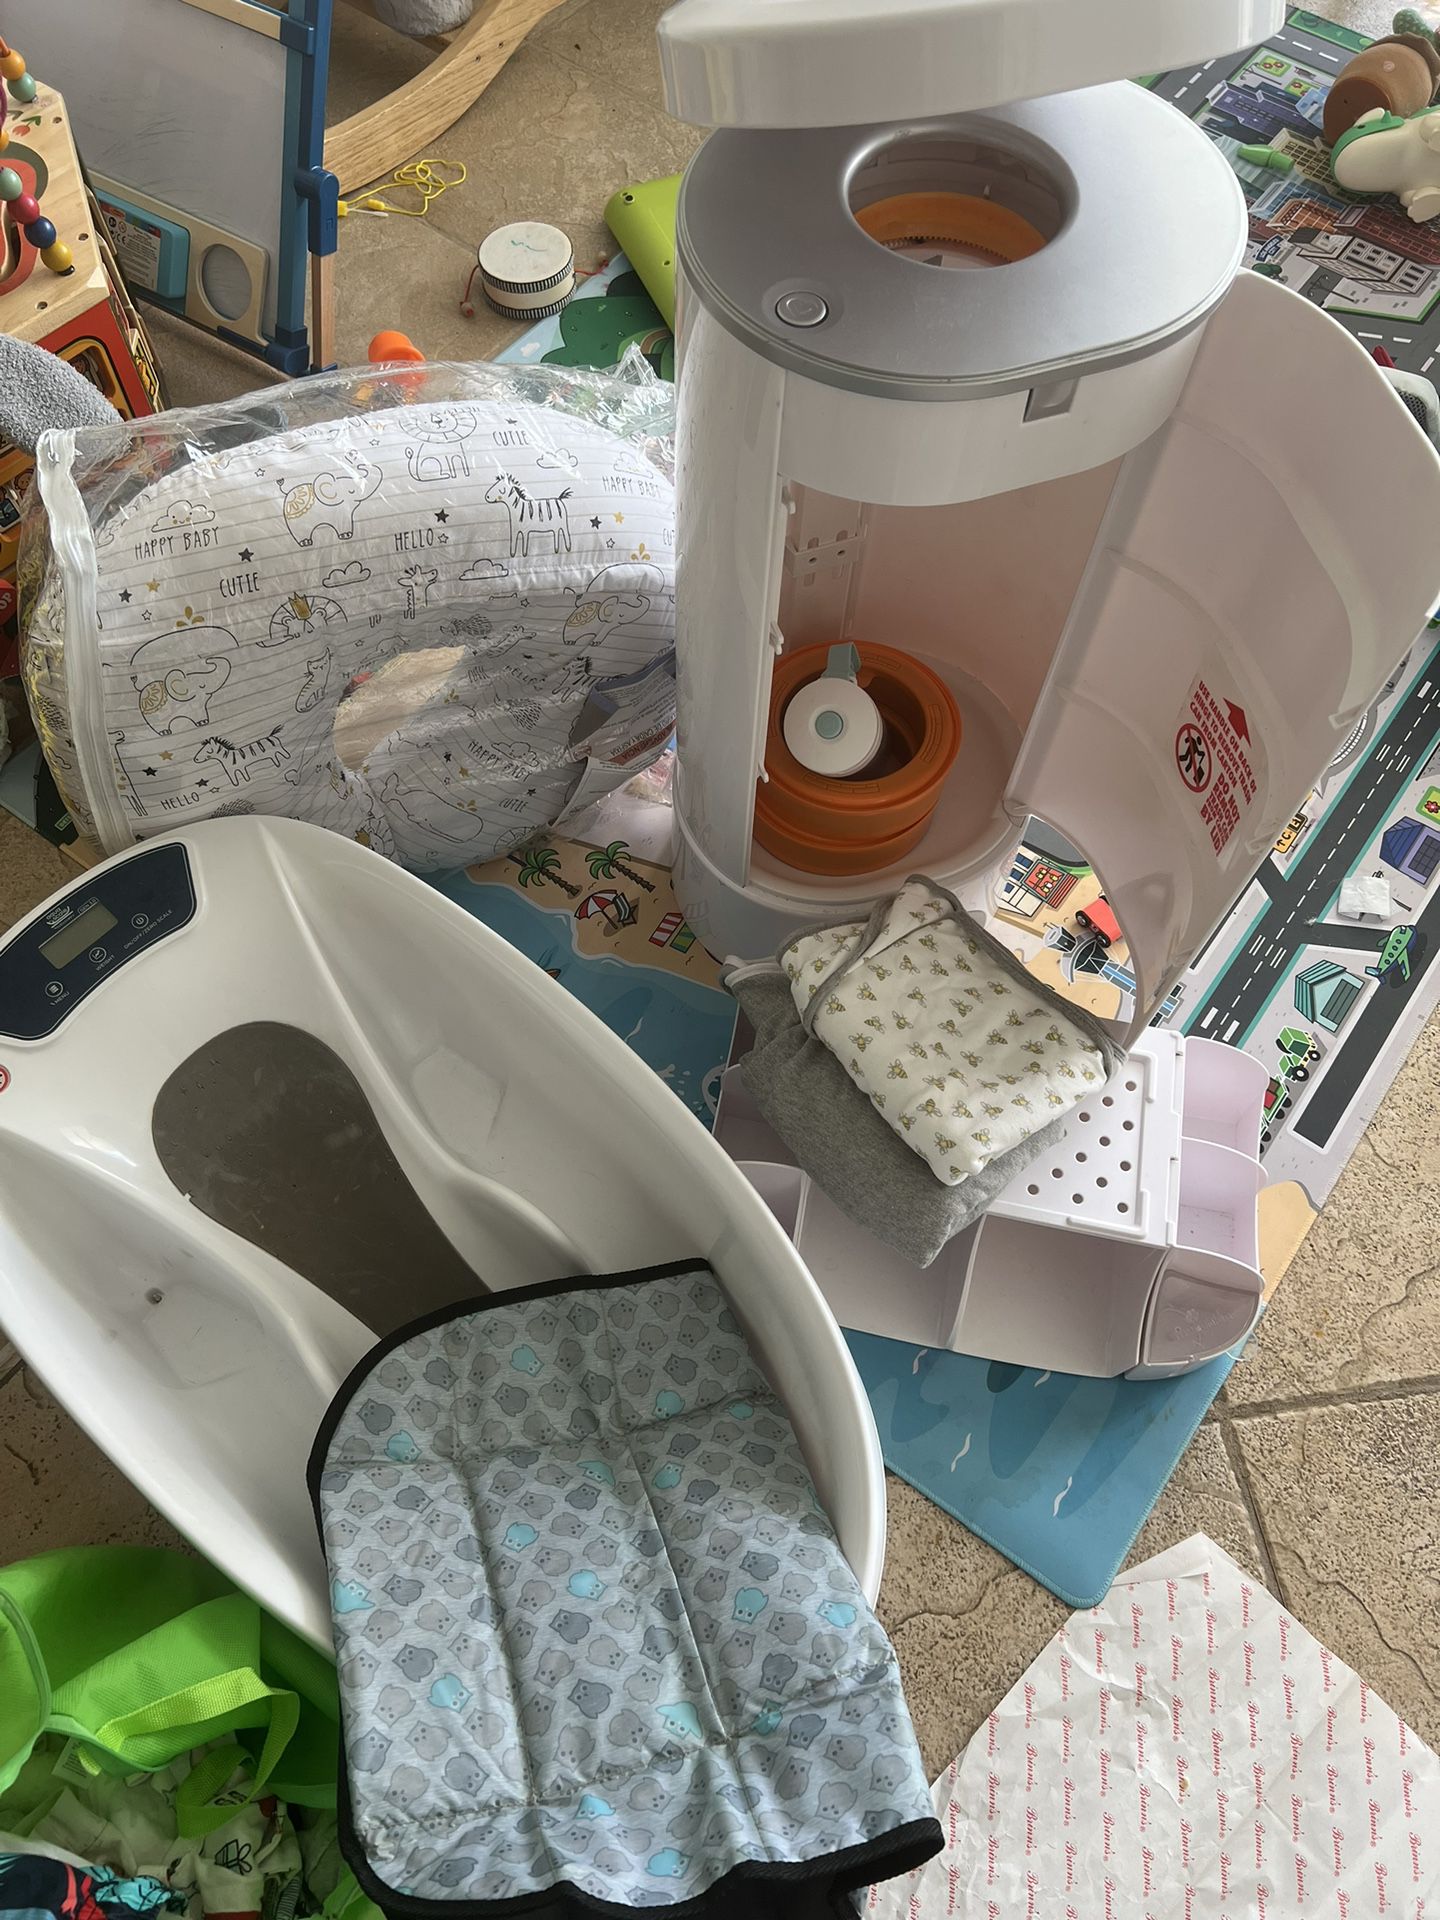 Bundle Newborn Baby  ( Diaper Pail , Bath Tub With Weight And Temperature Baby Pillow And Etc